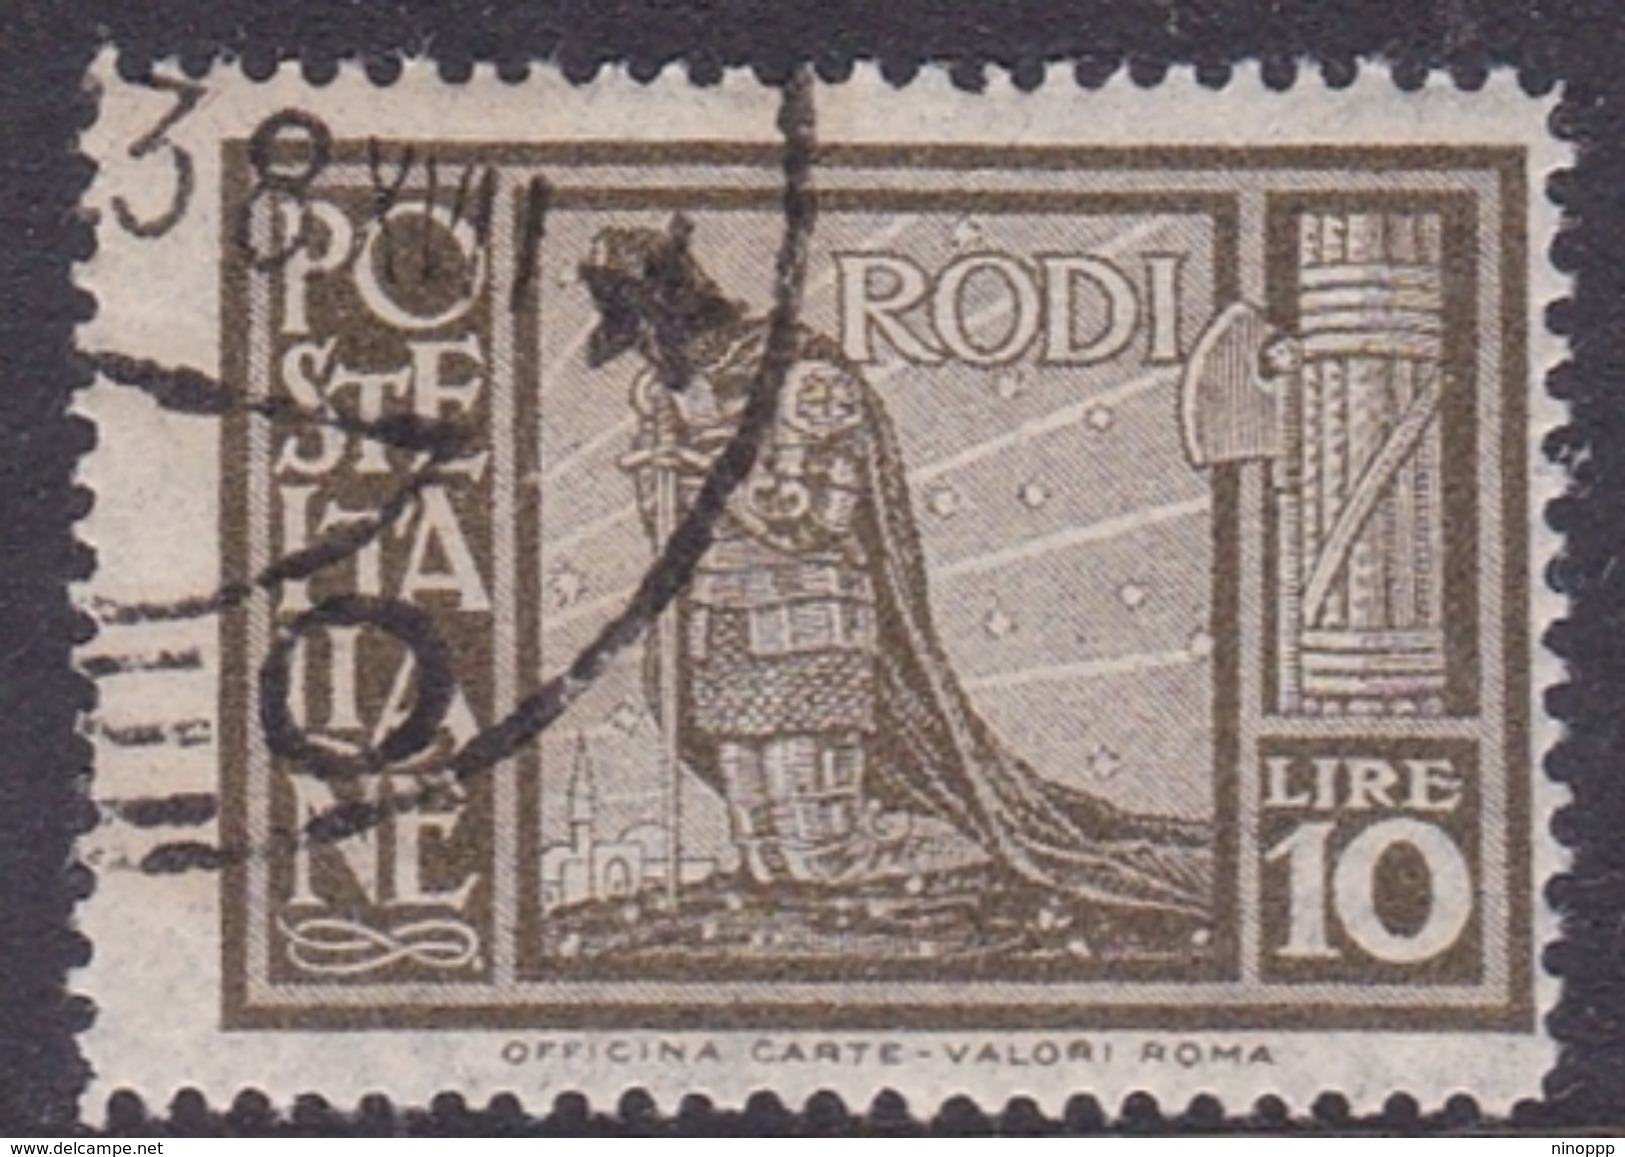 Italy-Colonies And Territories-Aegean General Issue-Rodi S64 1932 Pictorials Perf 14 Lire 10 Olive Used - Emissions Générales